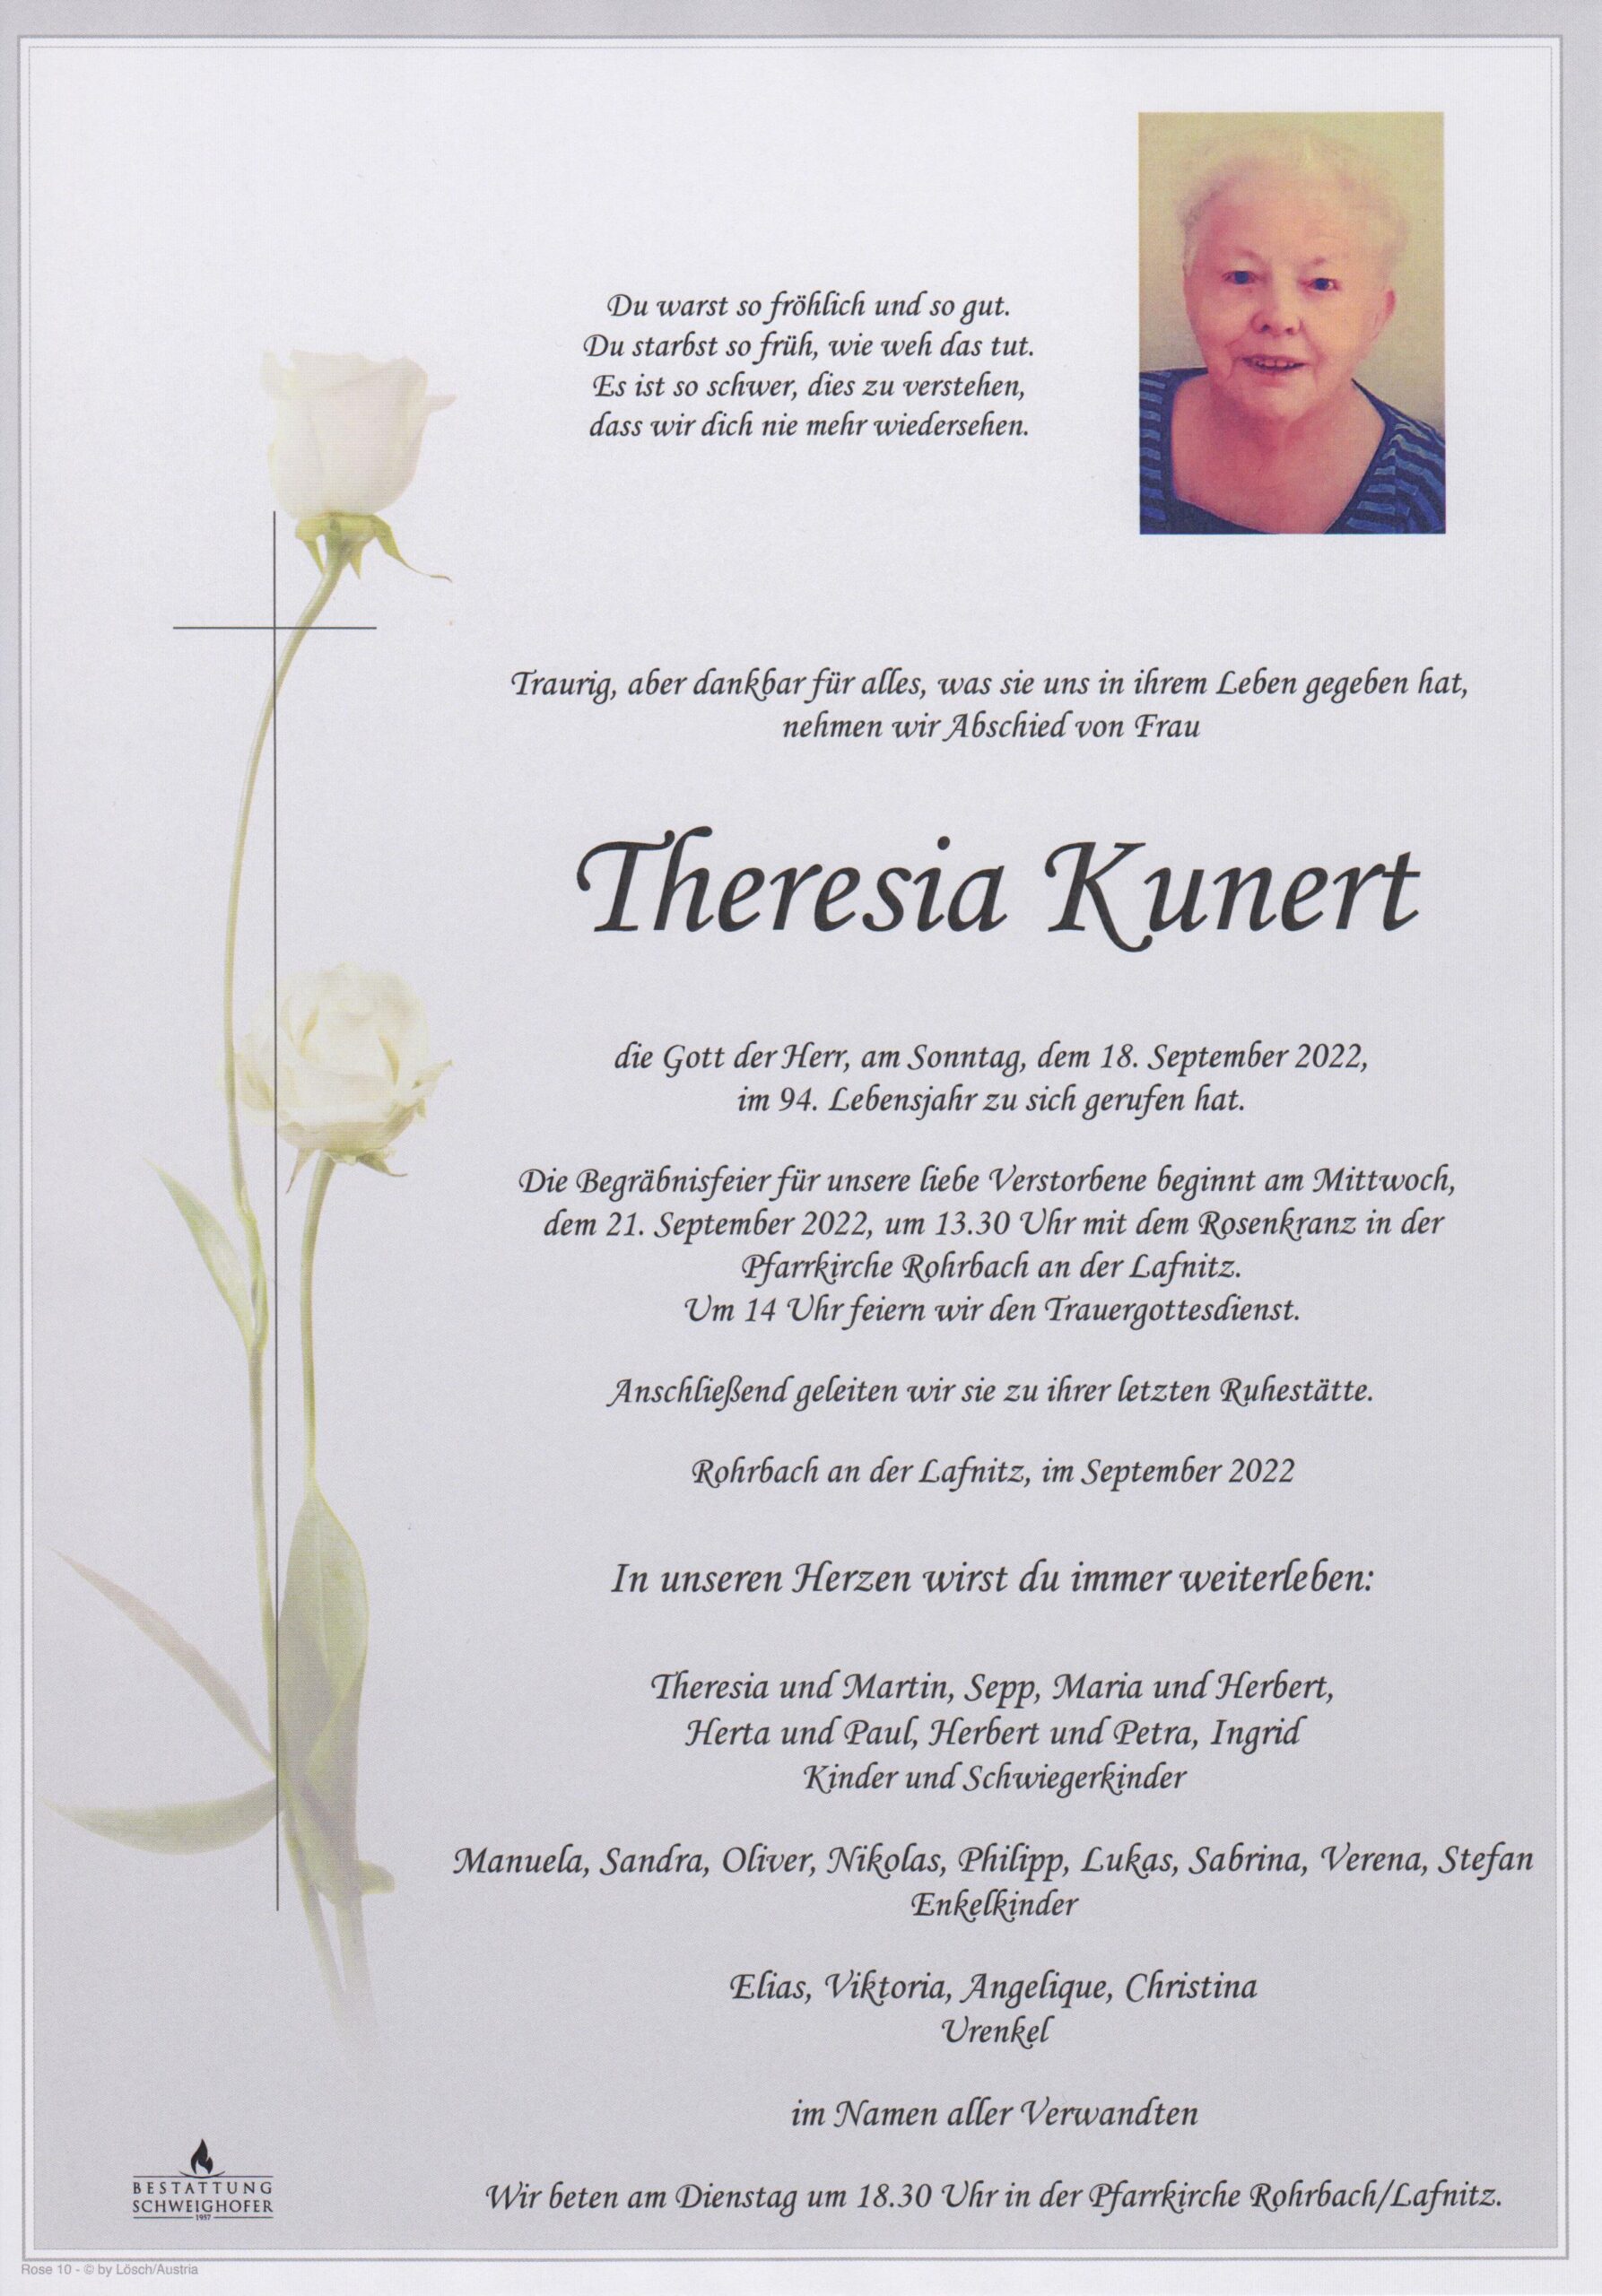 You are currently viewing Theresia Kunert